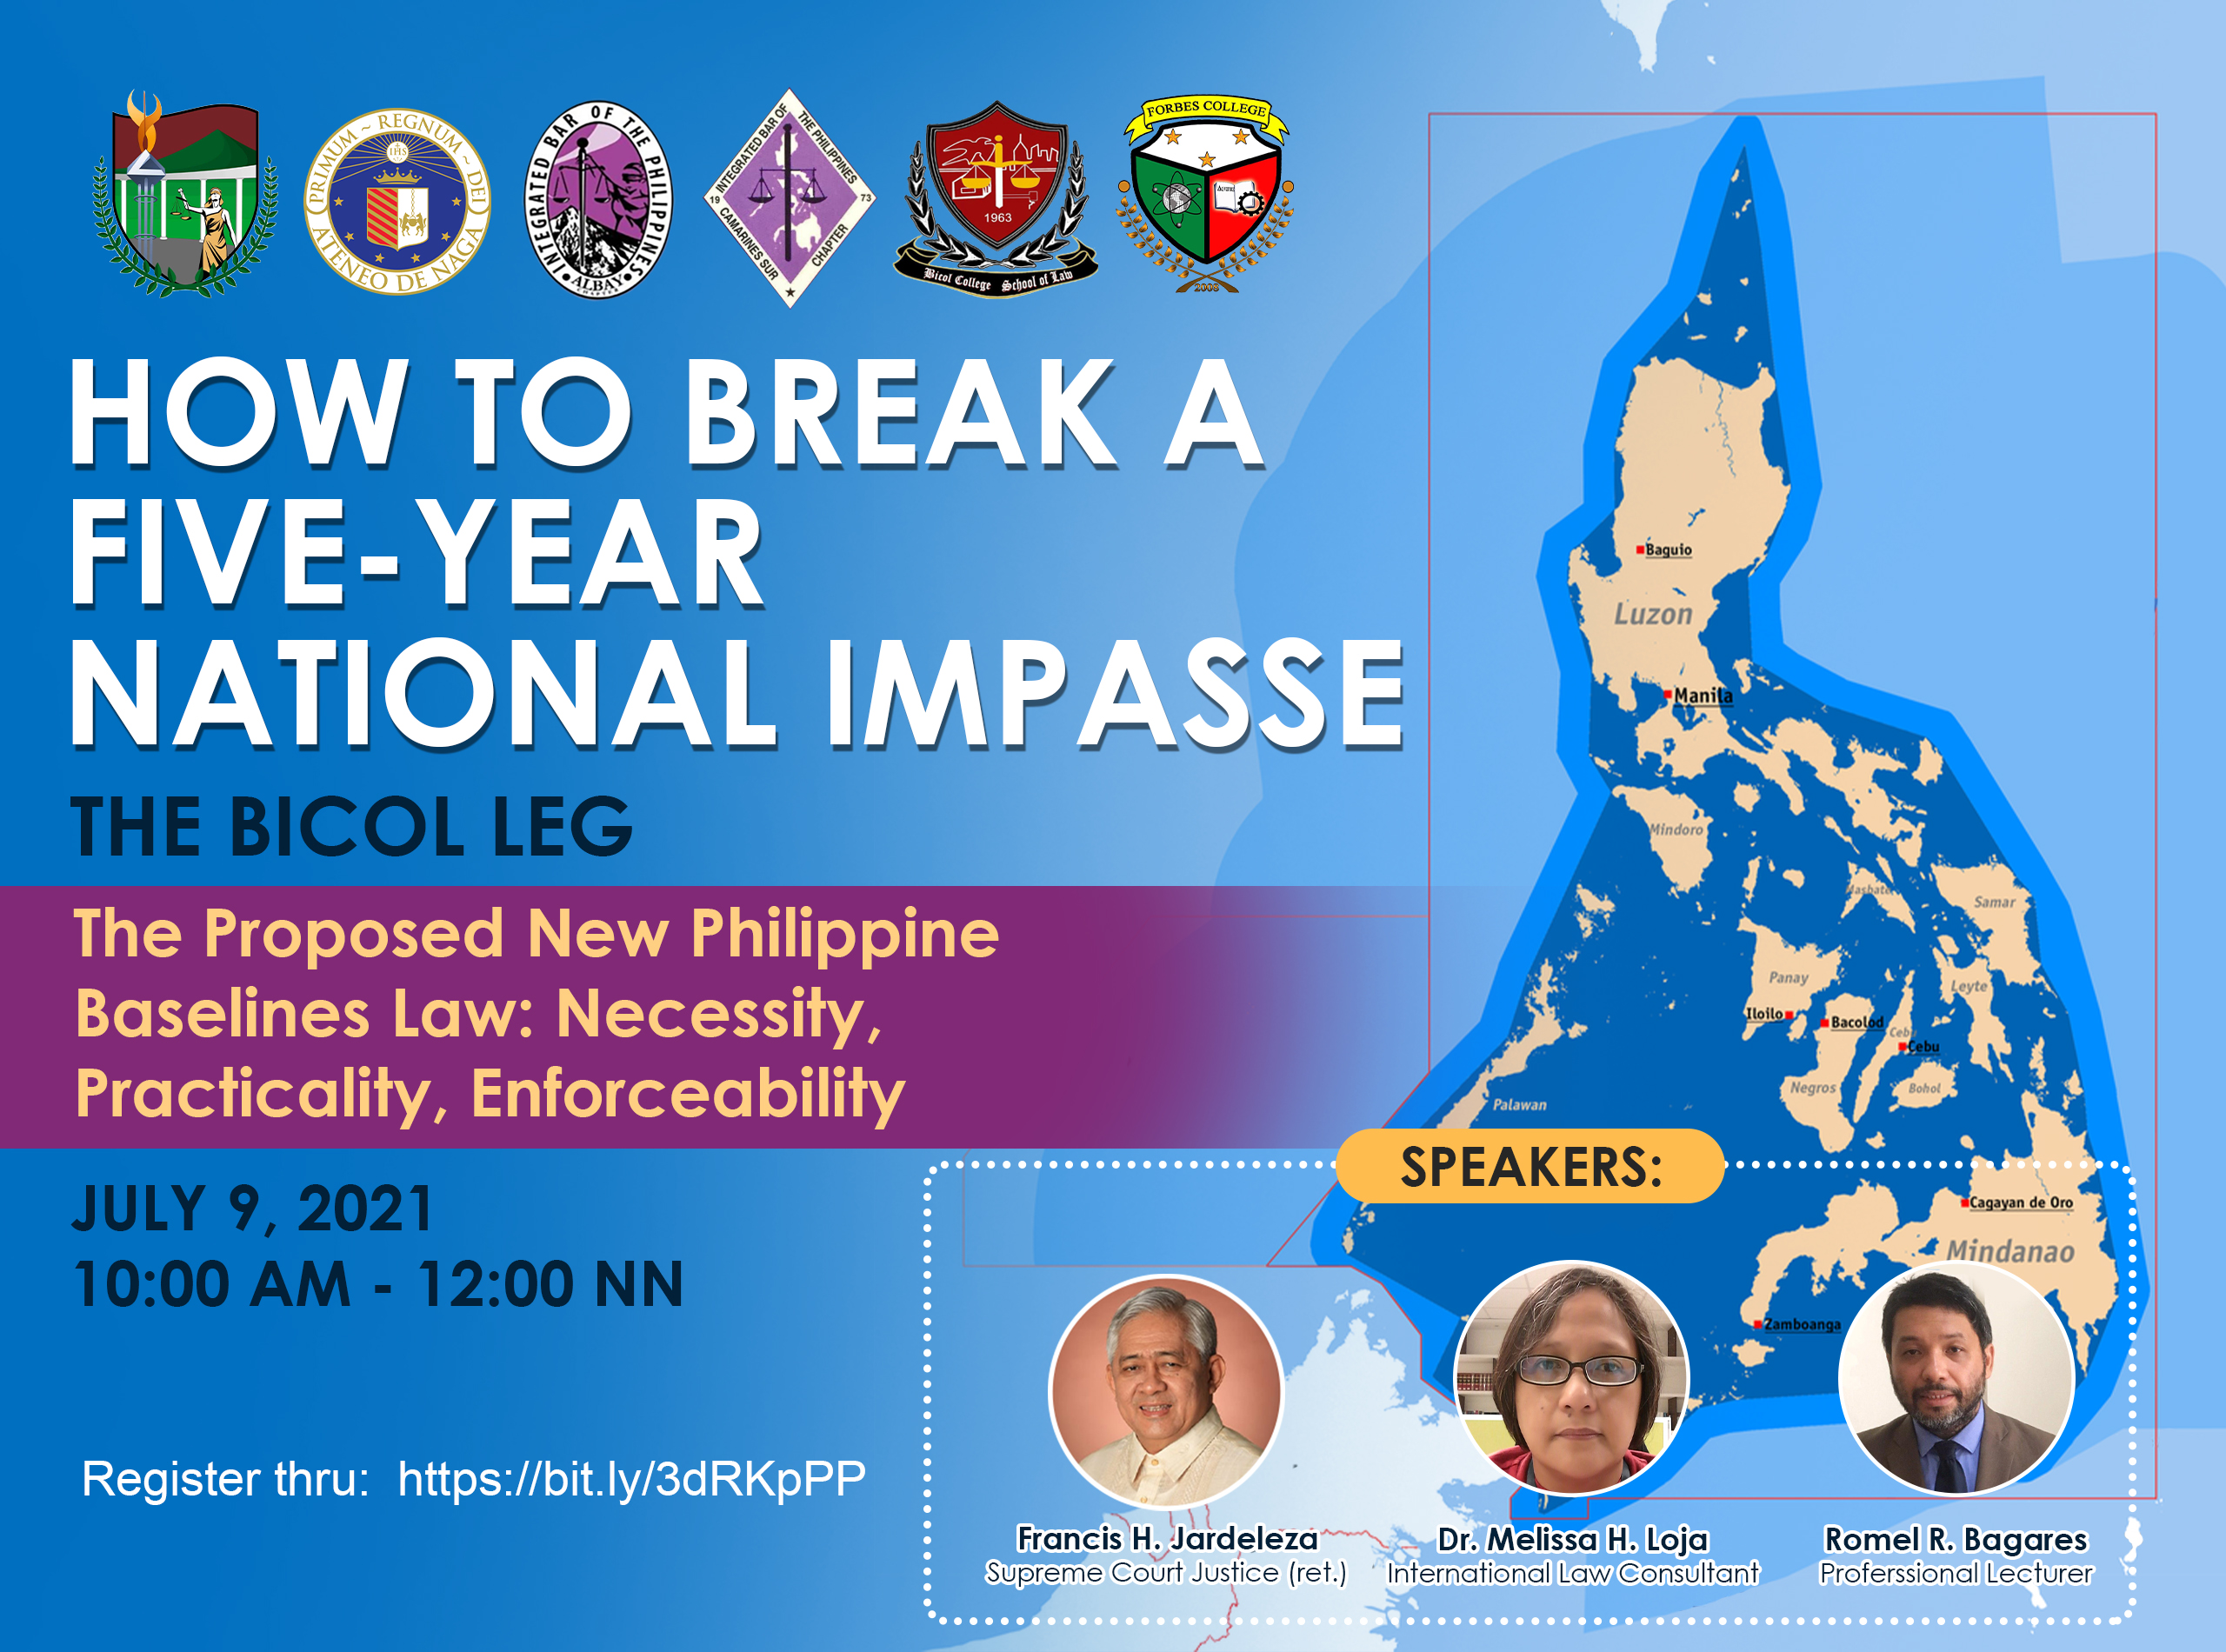 THE BICOL LEG- New Philippine Baselines Law Conference